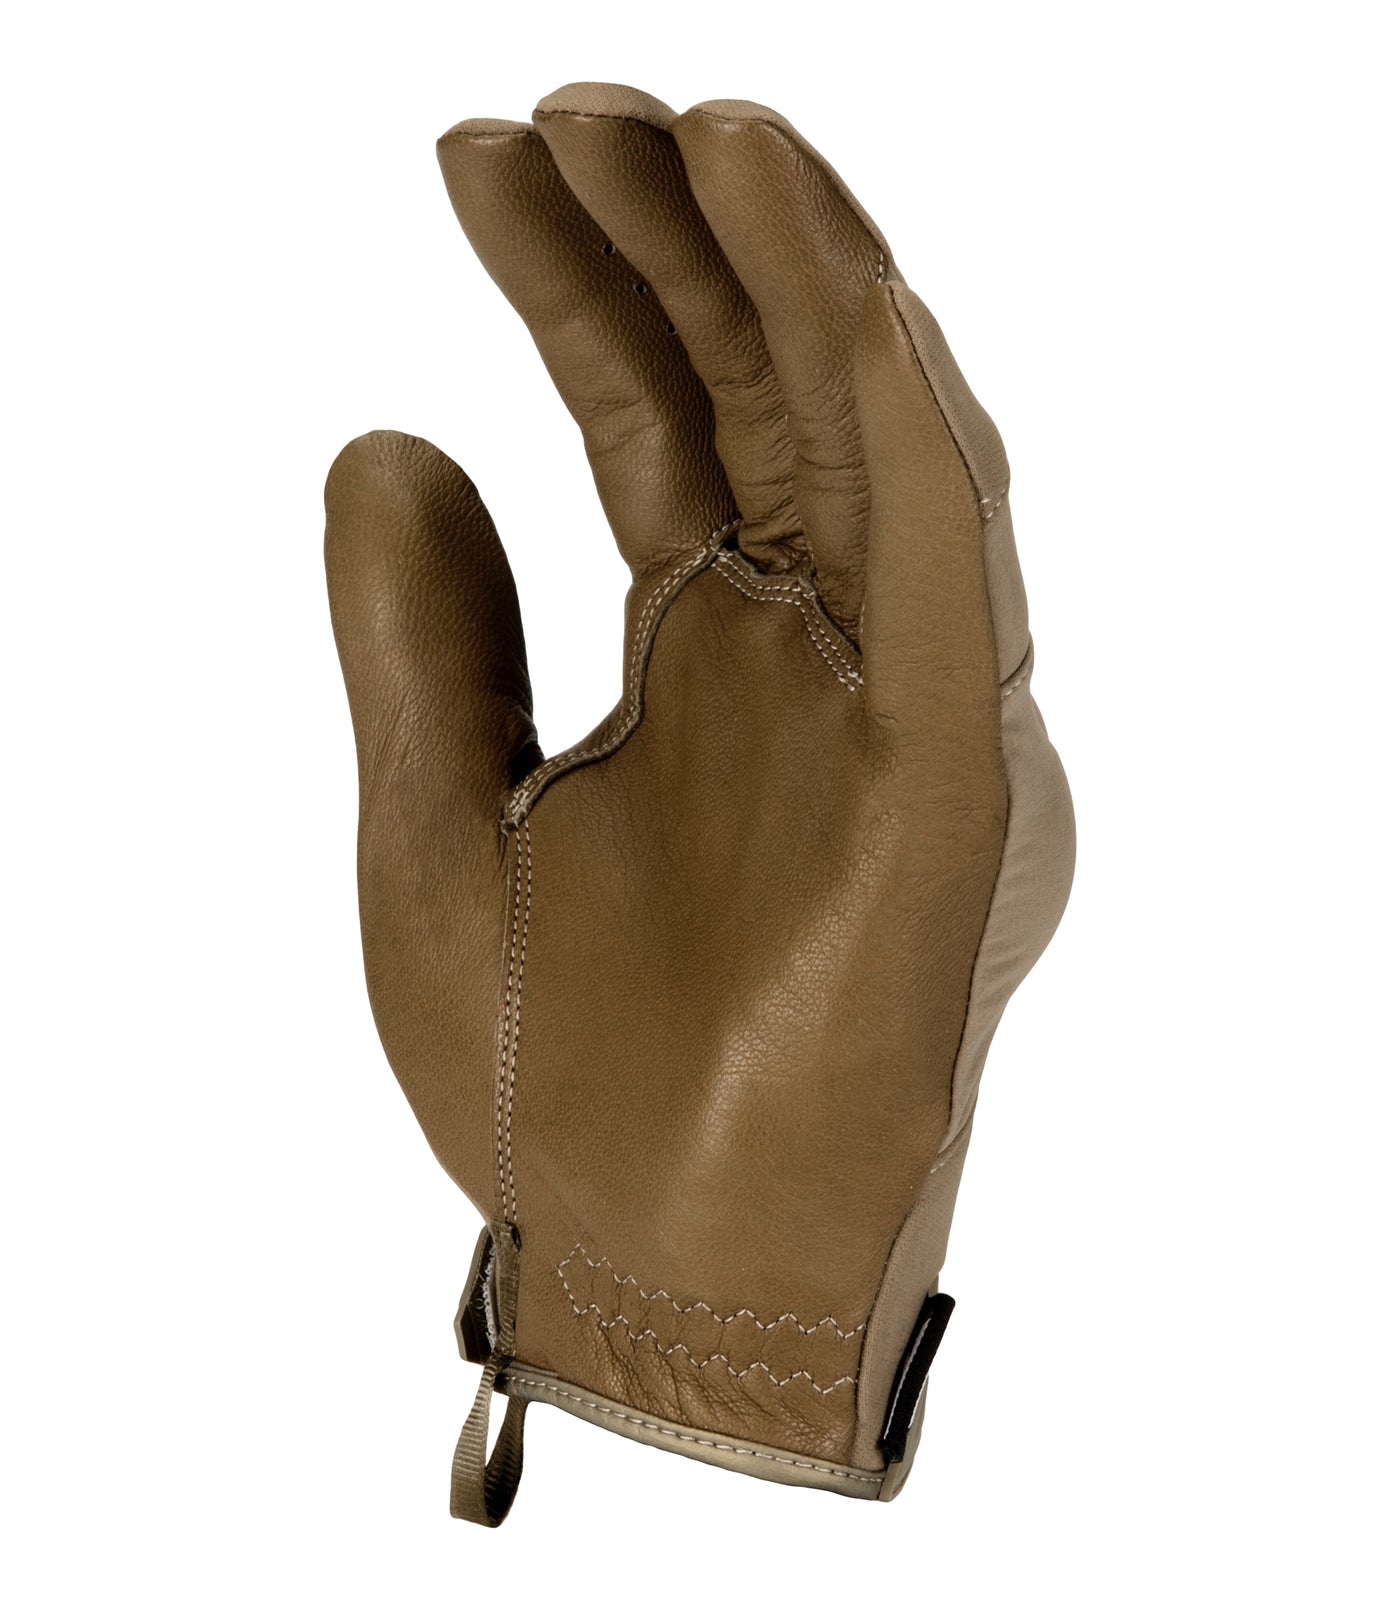 Hard Knuckle Gloves – First Tactical